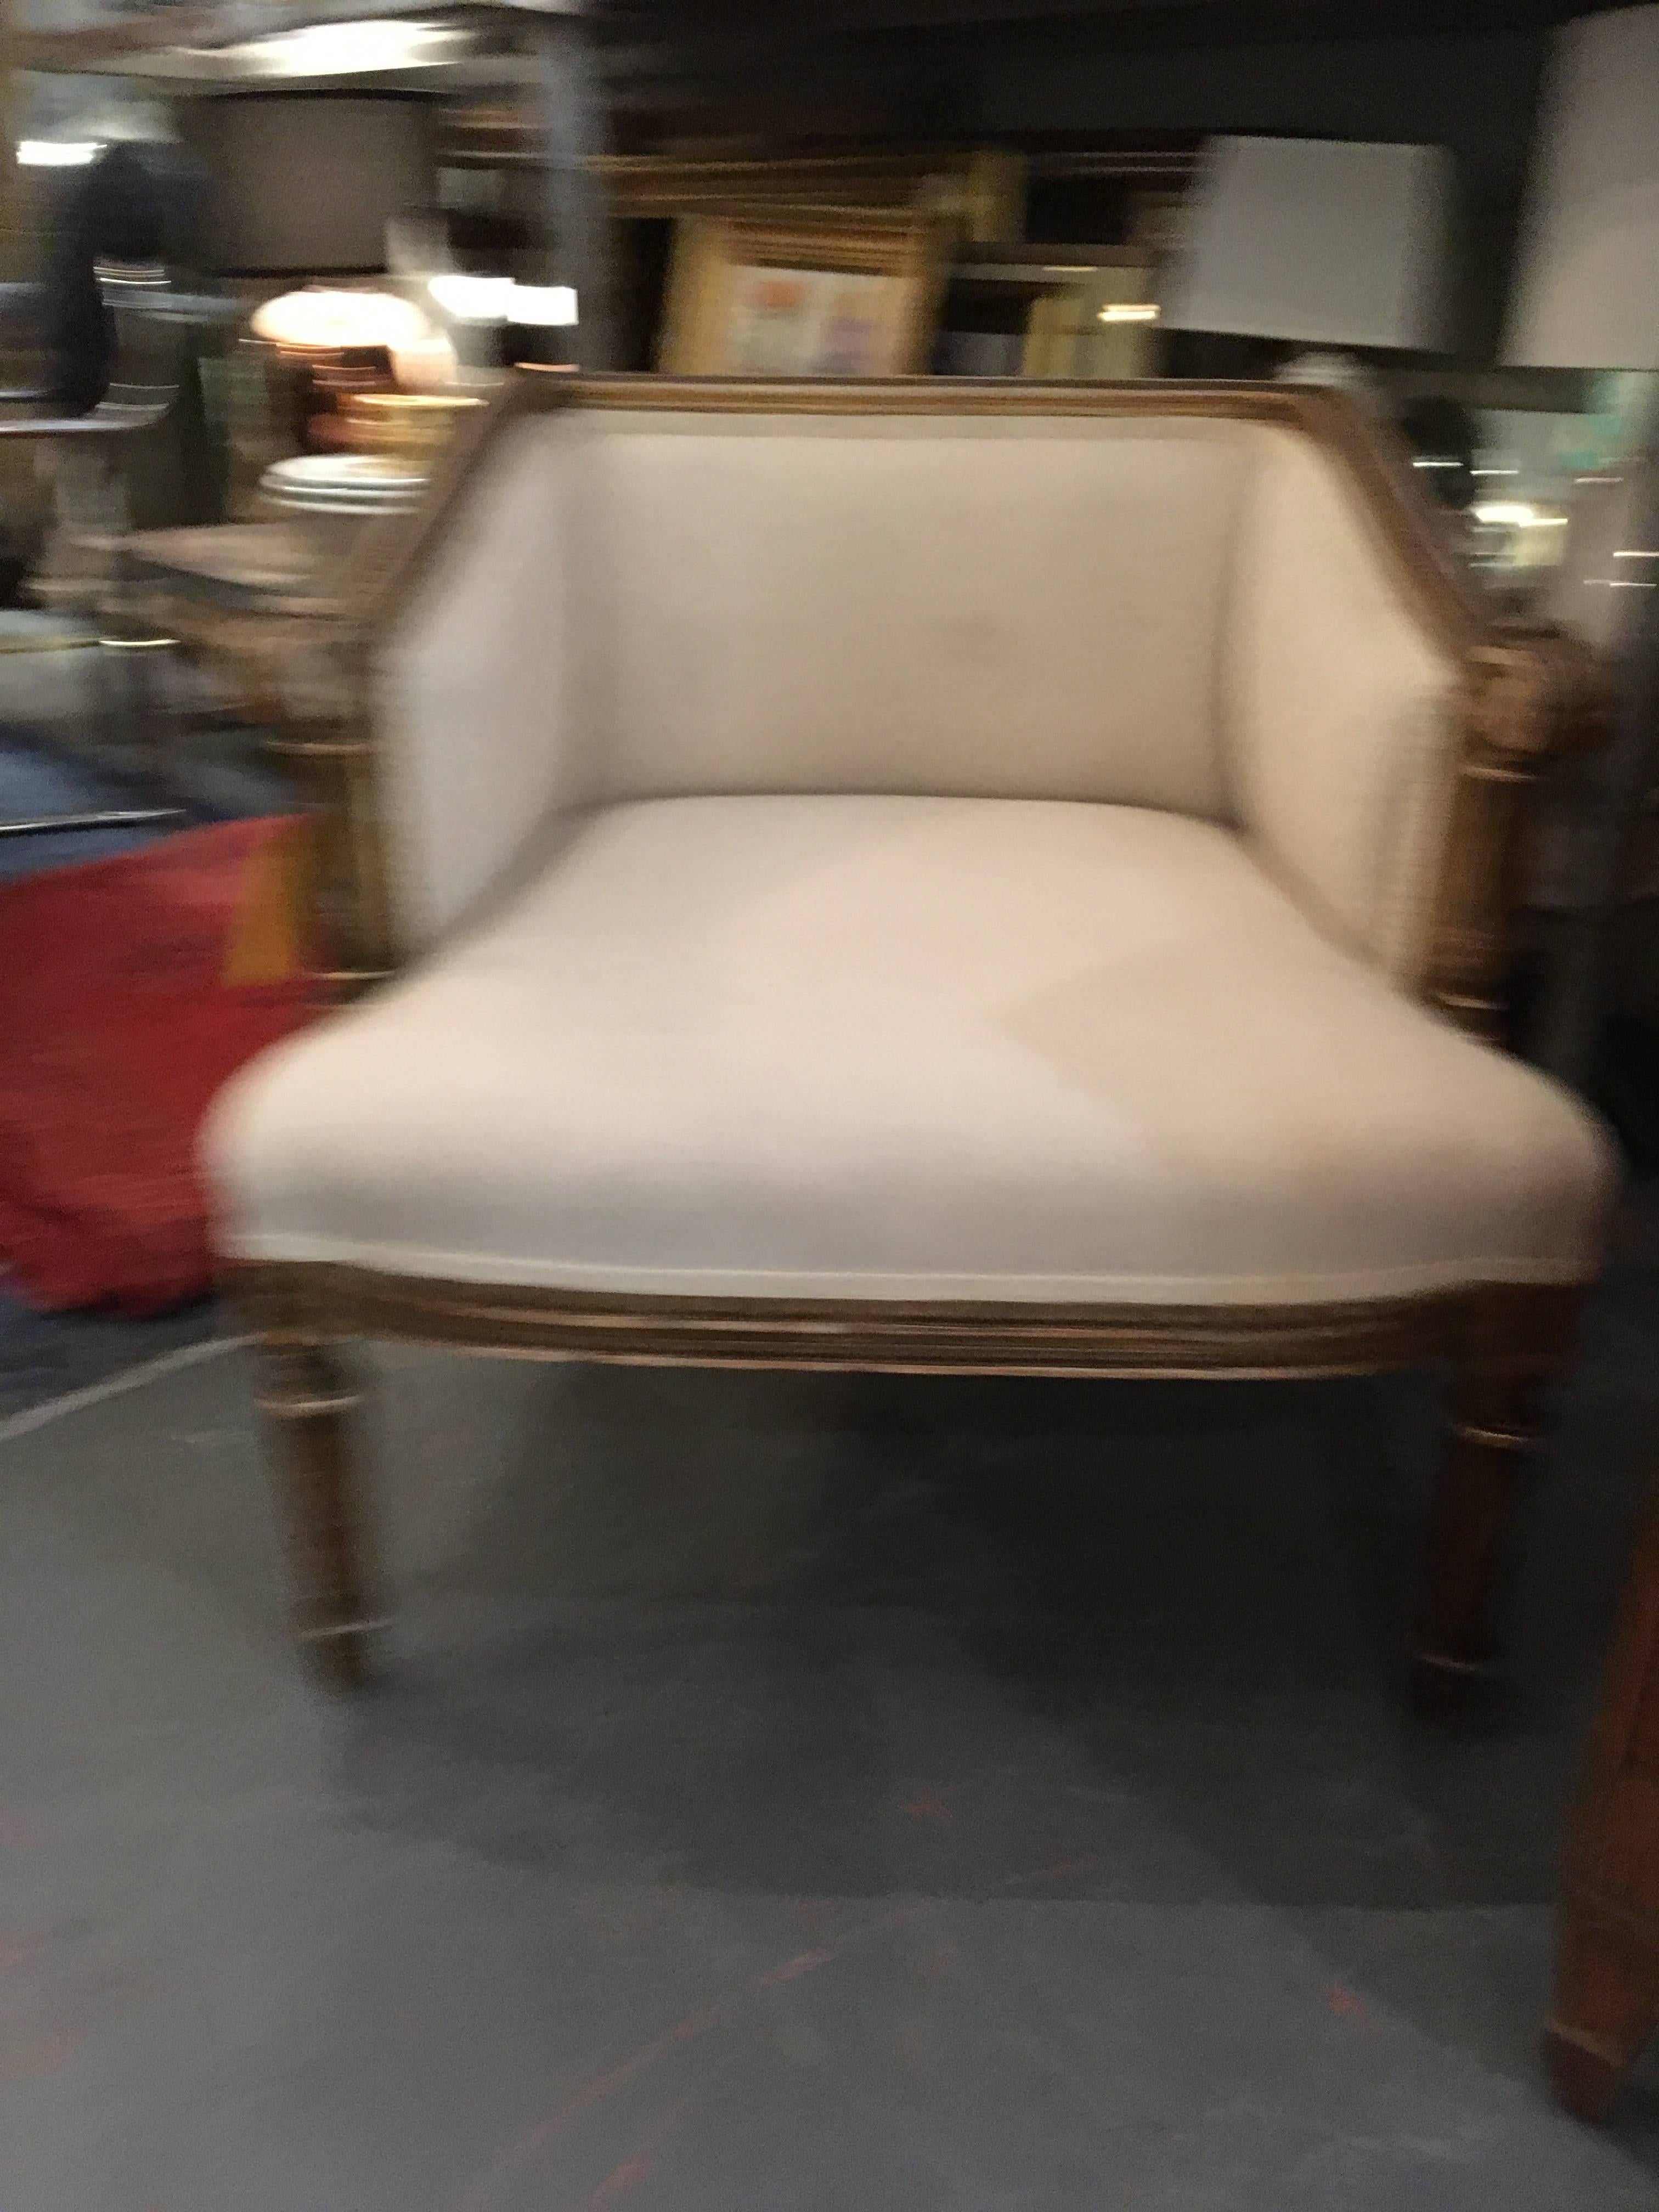 Lovely small antique French chair that looks great and is sturdy and comfortable. Hand-carved wood frame with worn gilding and muslin upholstery.